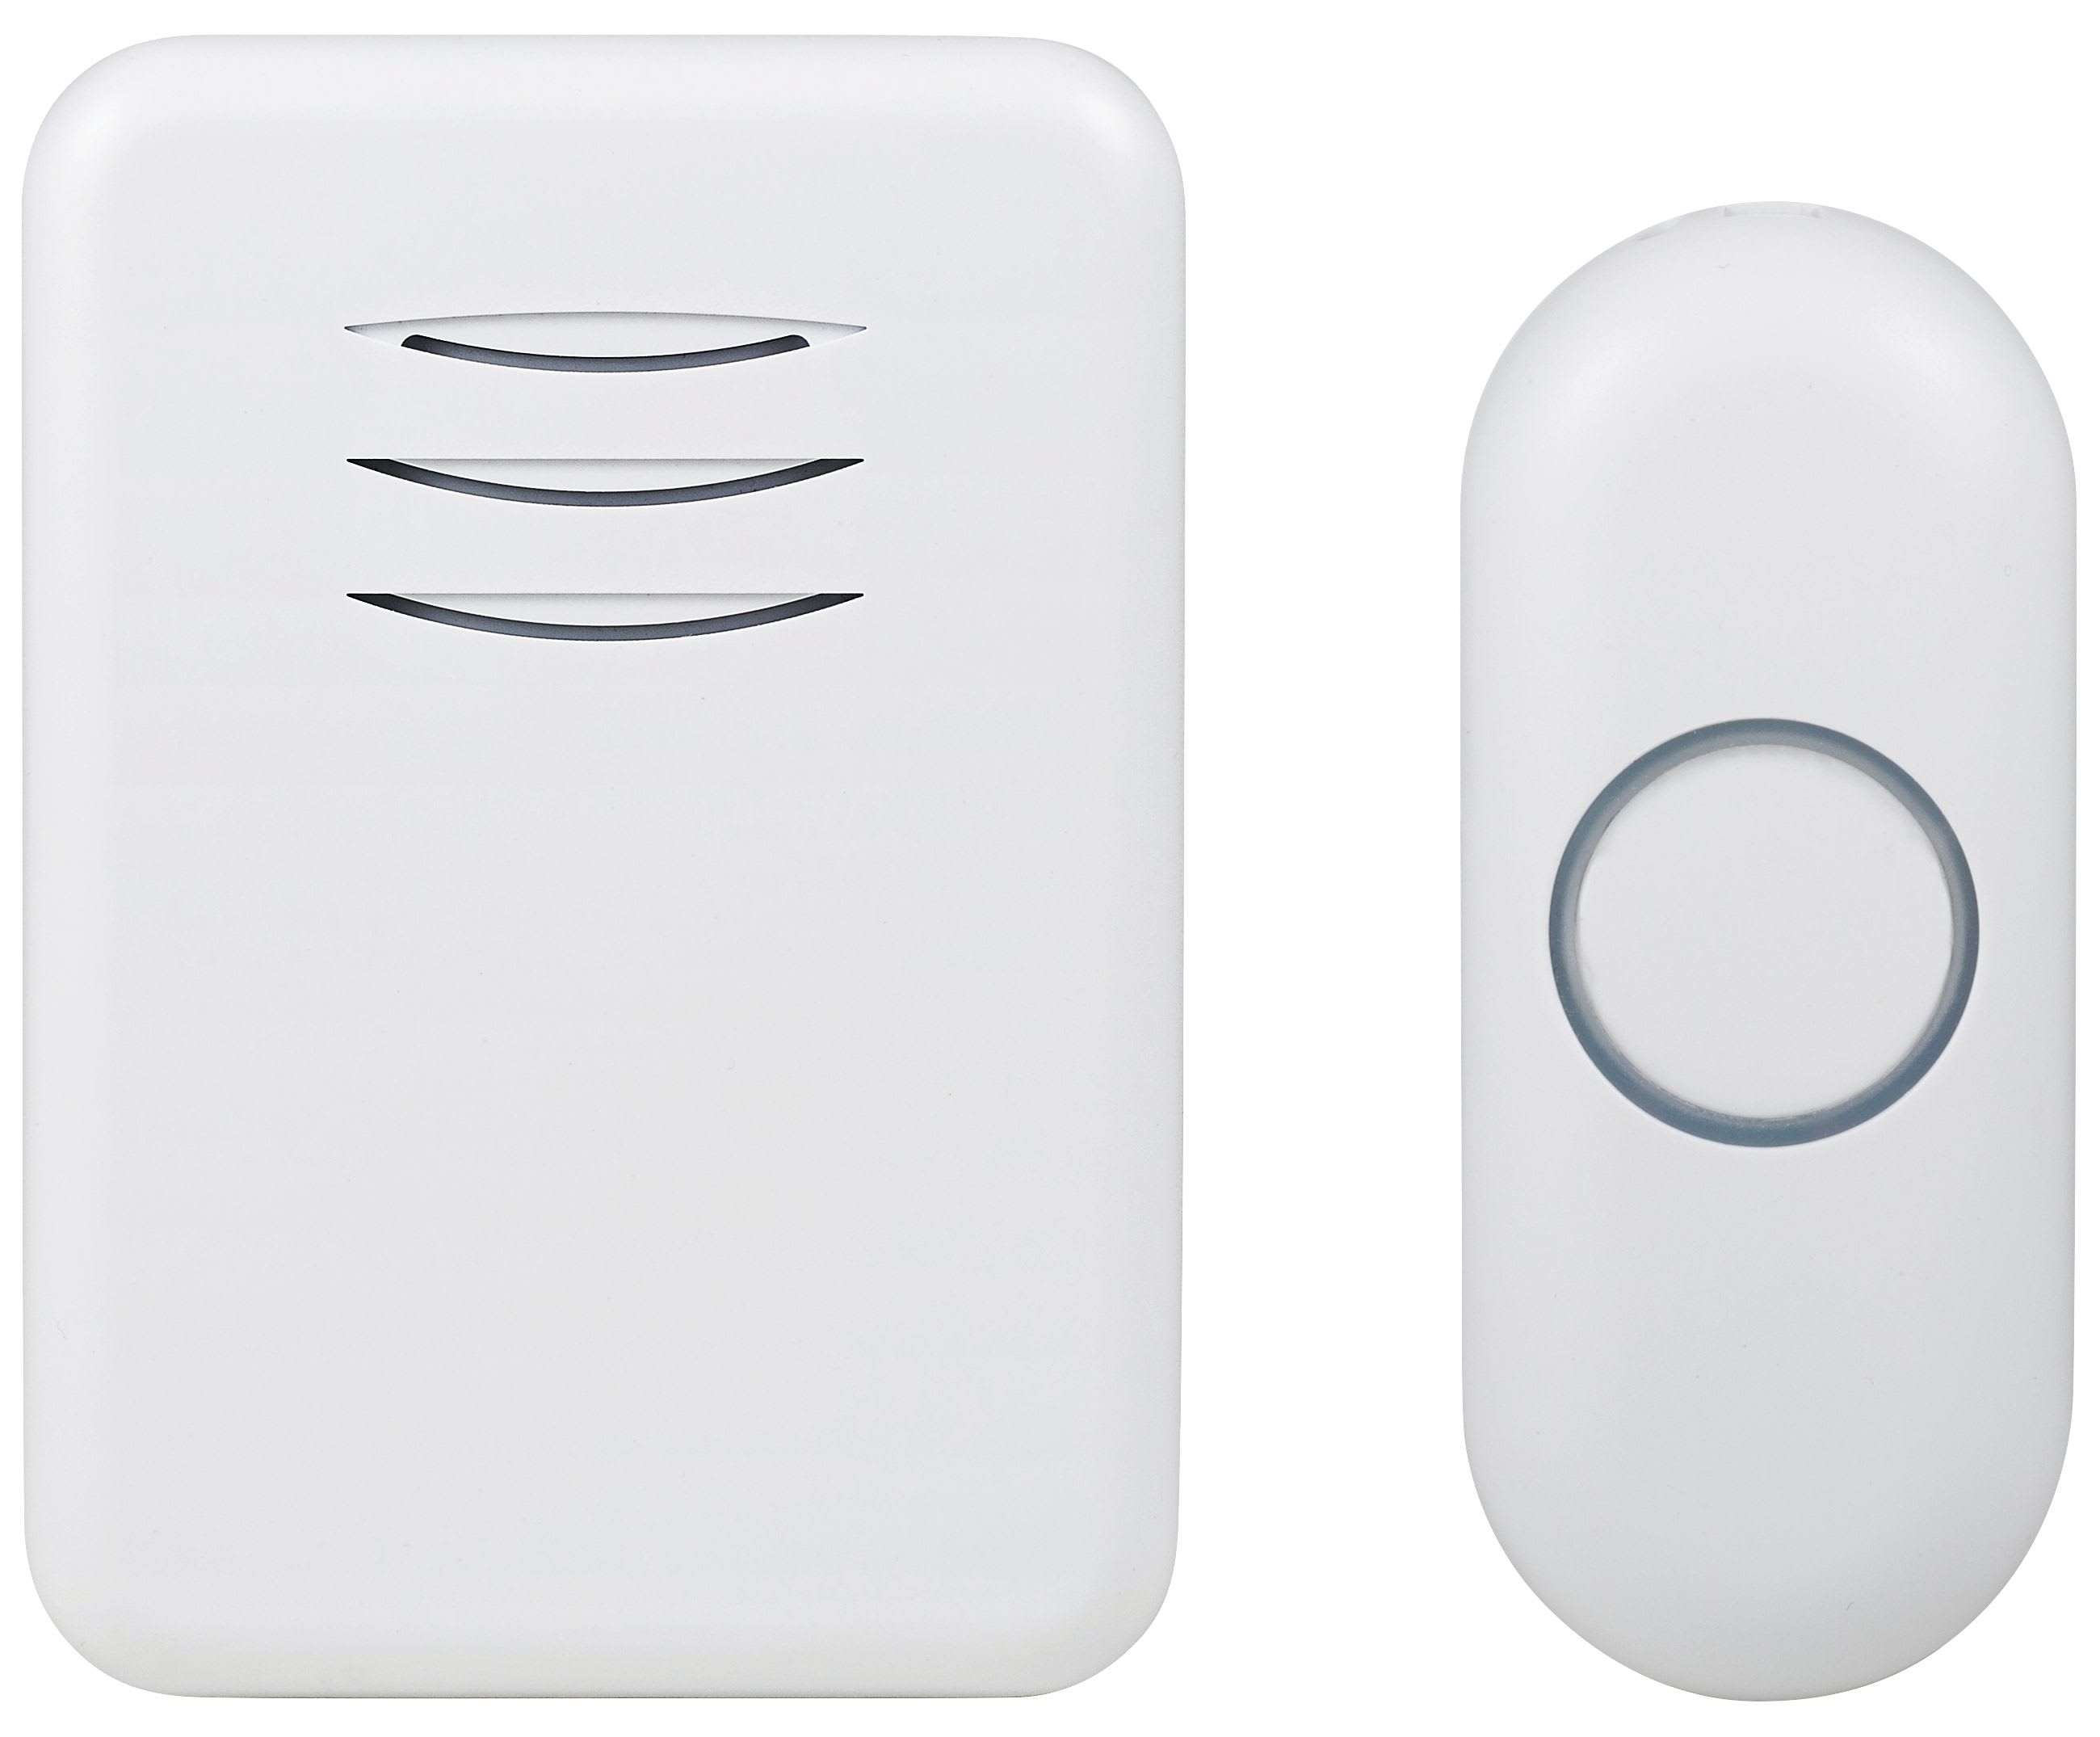 Byron DBY-22312UK Wireless Doorbell with Plug-In Chime -